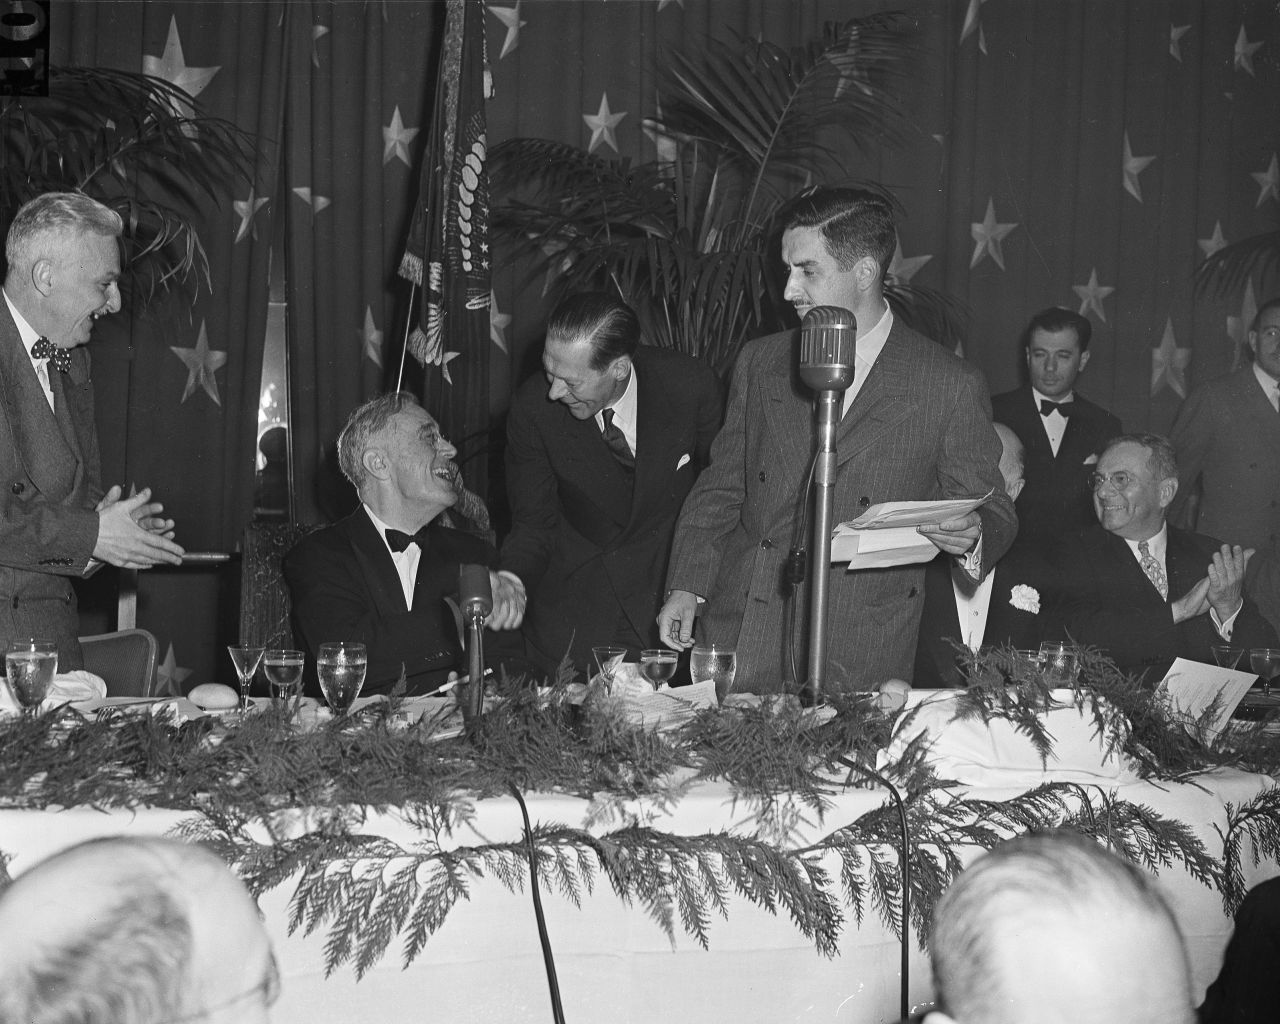 President Franklin D. Roosevelt, seated, shakes hands with Raymond P. Brandt, chief of the Washington bureau of the St. Louis Post-Dispatch, at the 1945 dinner. Roosevelt was congratulating Brandt for winning the first Raymond Clapper Memorial Award, which was given by the White House Correspondents' Association for distinguished reporting.